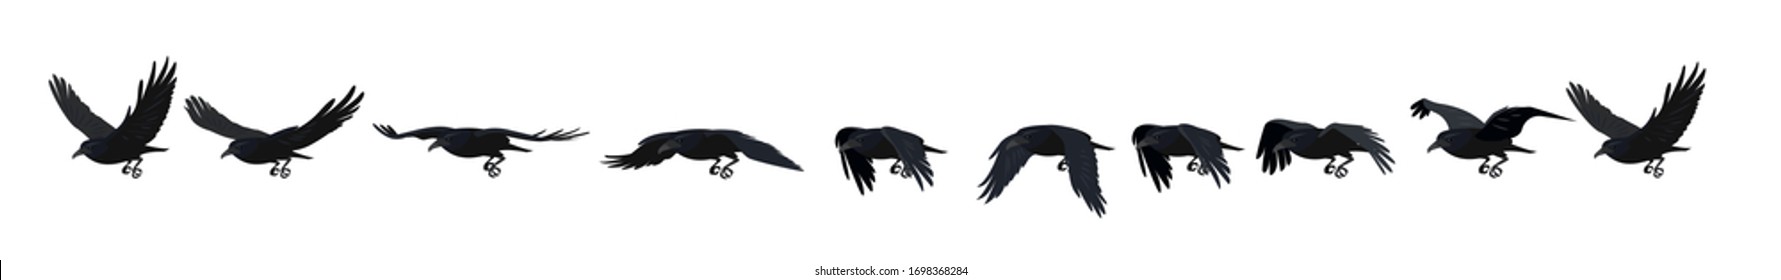 Crow or rook. Flying raven, sequences for ready 2d animation.